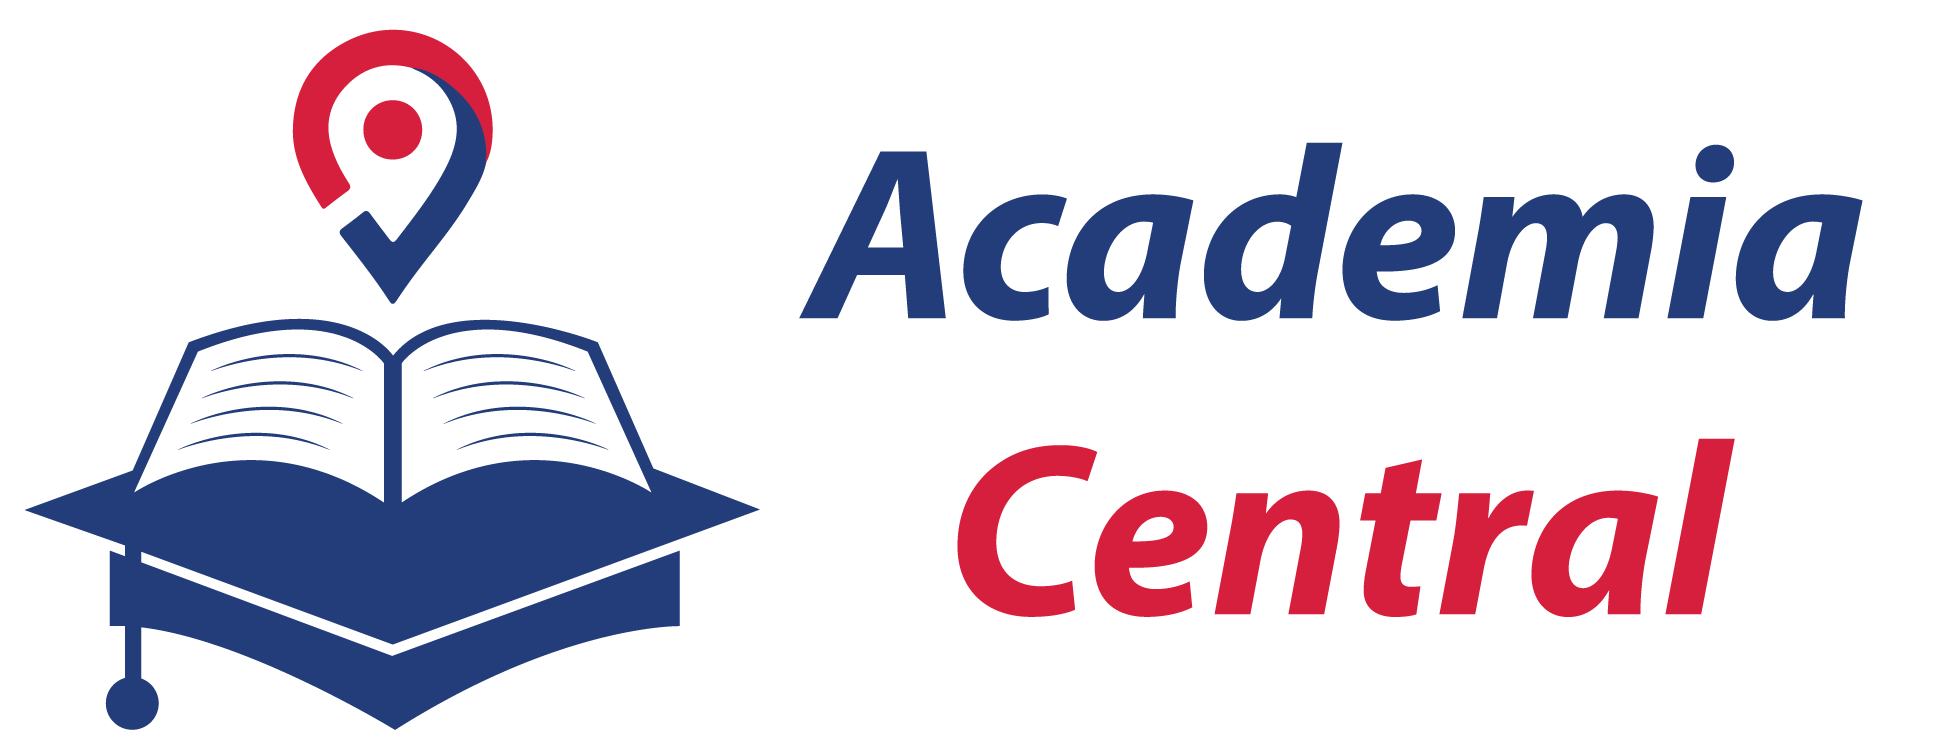 AcademiaCentral